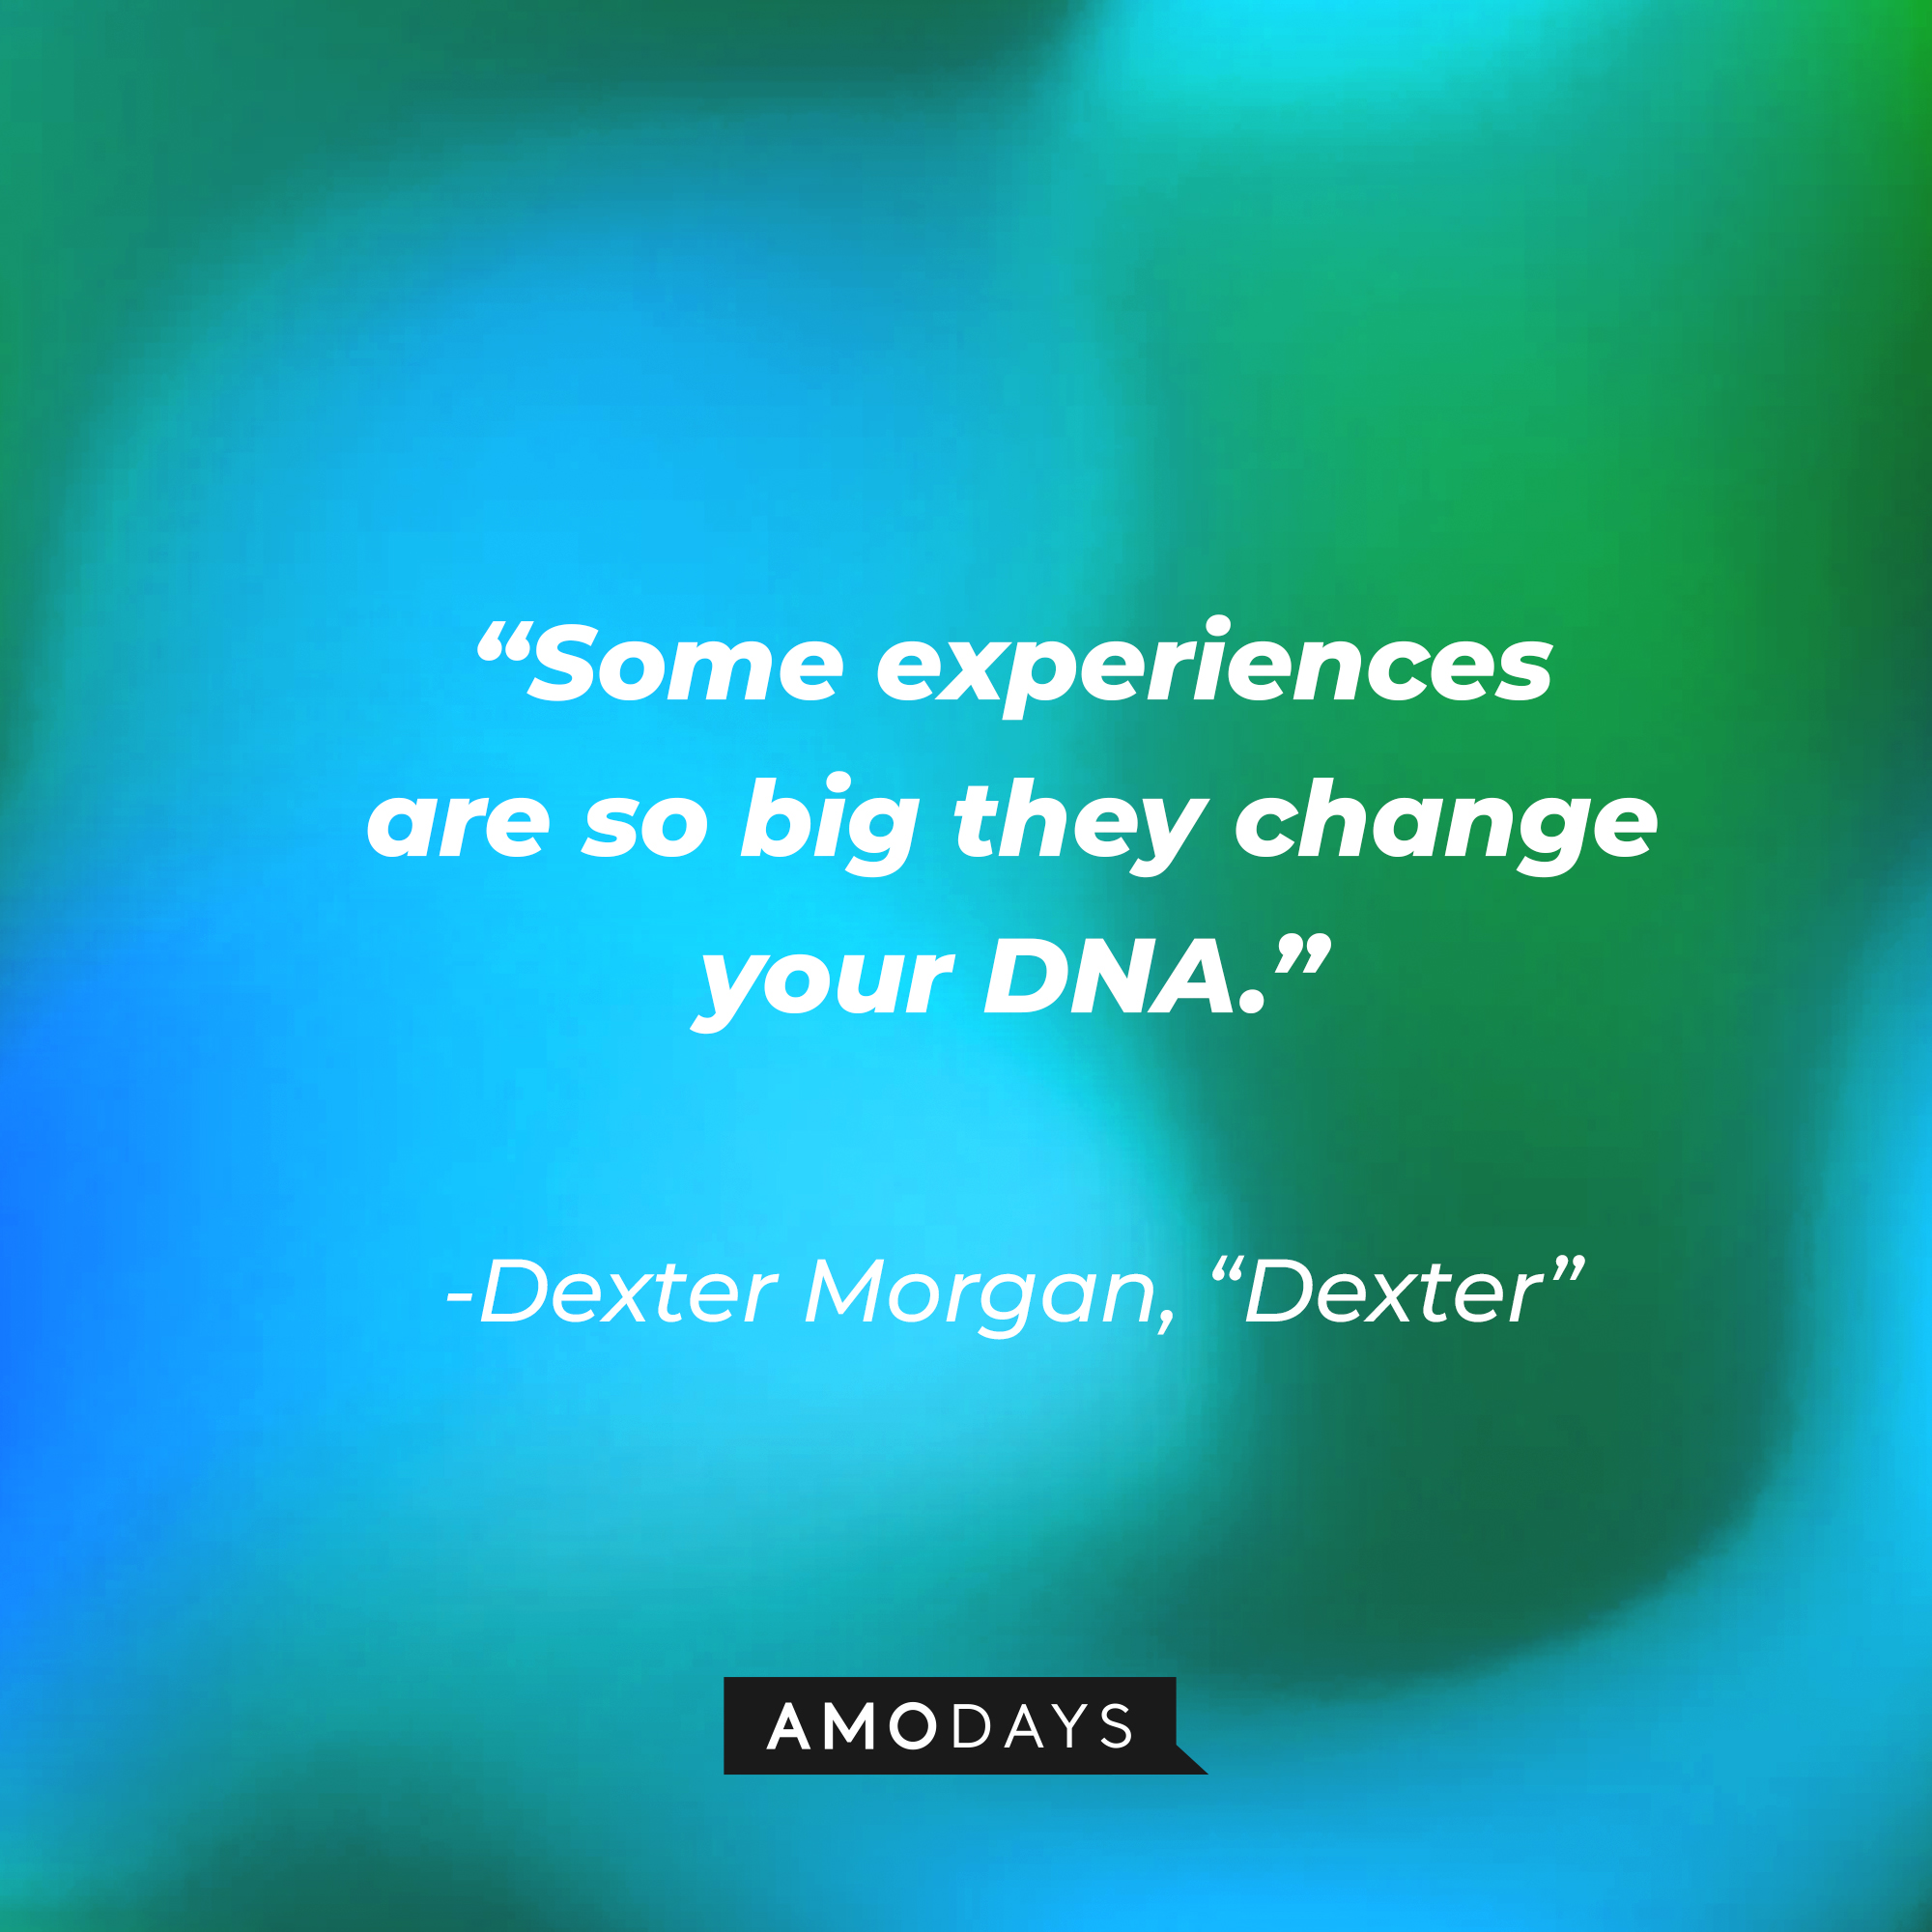 Dexter Morgan's quote from "Dexter:" “Some experiences are so big they change your DNA.” | Source: AmoDays